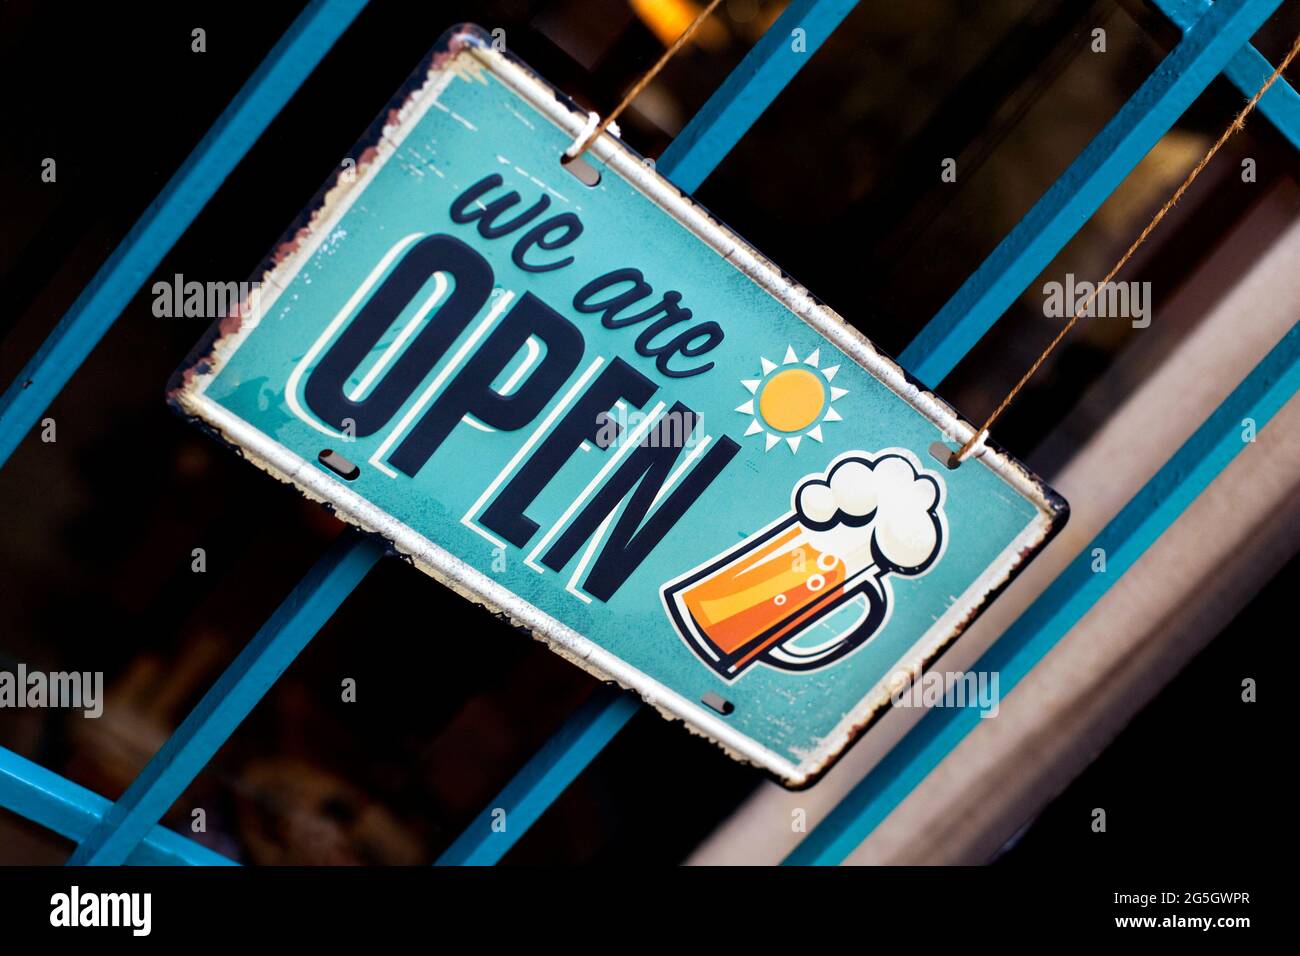 Vintage open sign on a window Stock Photo